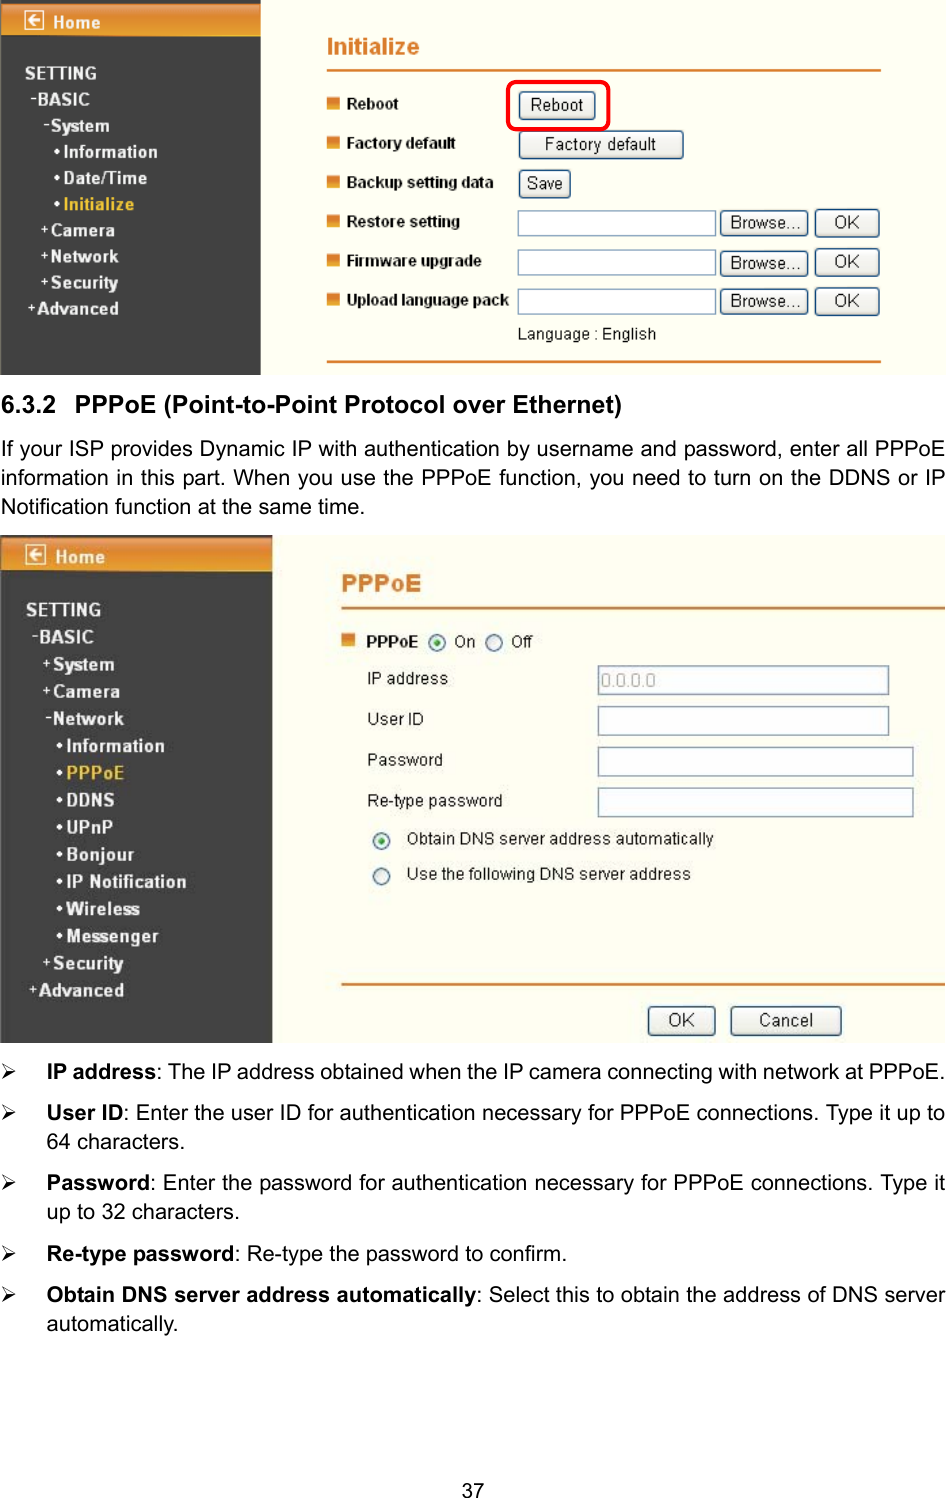 37  6.3.2  PPPoE (Point-to-Point Protocol over Ethernet)   If your ISP provides Dynamic IP with authentication by username and password, enter all PPPoE information in this part. When you use the PPPoE function, you need to turn on the DDNS or IP Notification function at the same time.    ¾ IP address: The IP address obtained when the IP camera connecting with network at PPPoE. ¾ User ID: Enter the user ID for authentication necessary for PPPoE connections. Type it up to 64 characters. ¾ Password: Enter the password for authentication necessary for PPPoE connections. Type it up to 32 characters. ¾ Re-type password: Re-type the password to confirm. ¾ Obtain DNS server address automatically: Select this to obtain the address of DNS server automatically. 